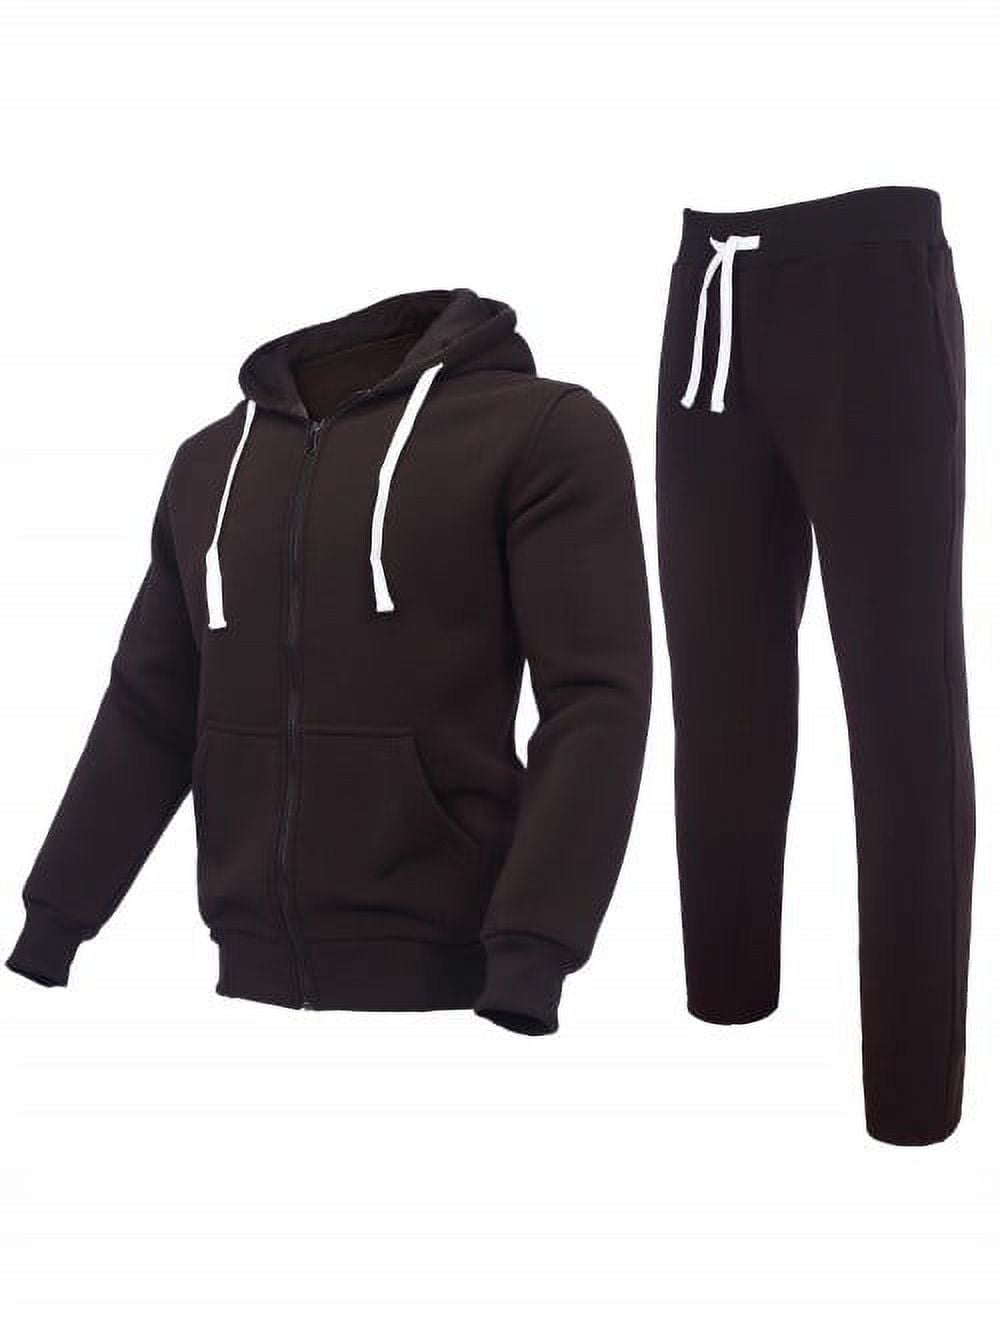 Tracksuit Men's Athletic Sweatsuits Casual Outfit for Men Fleece Hoodie ...